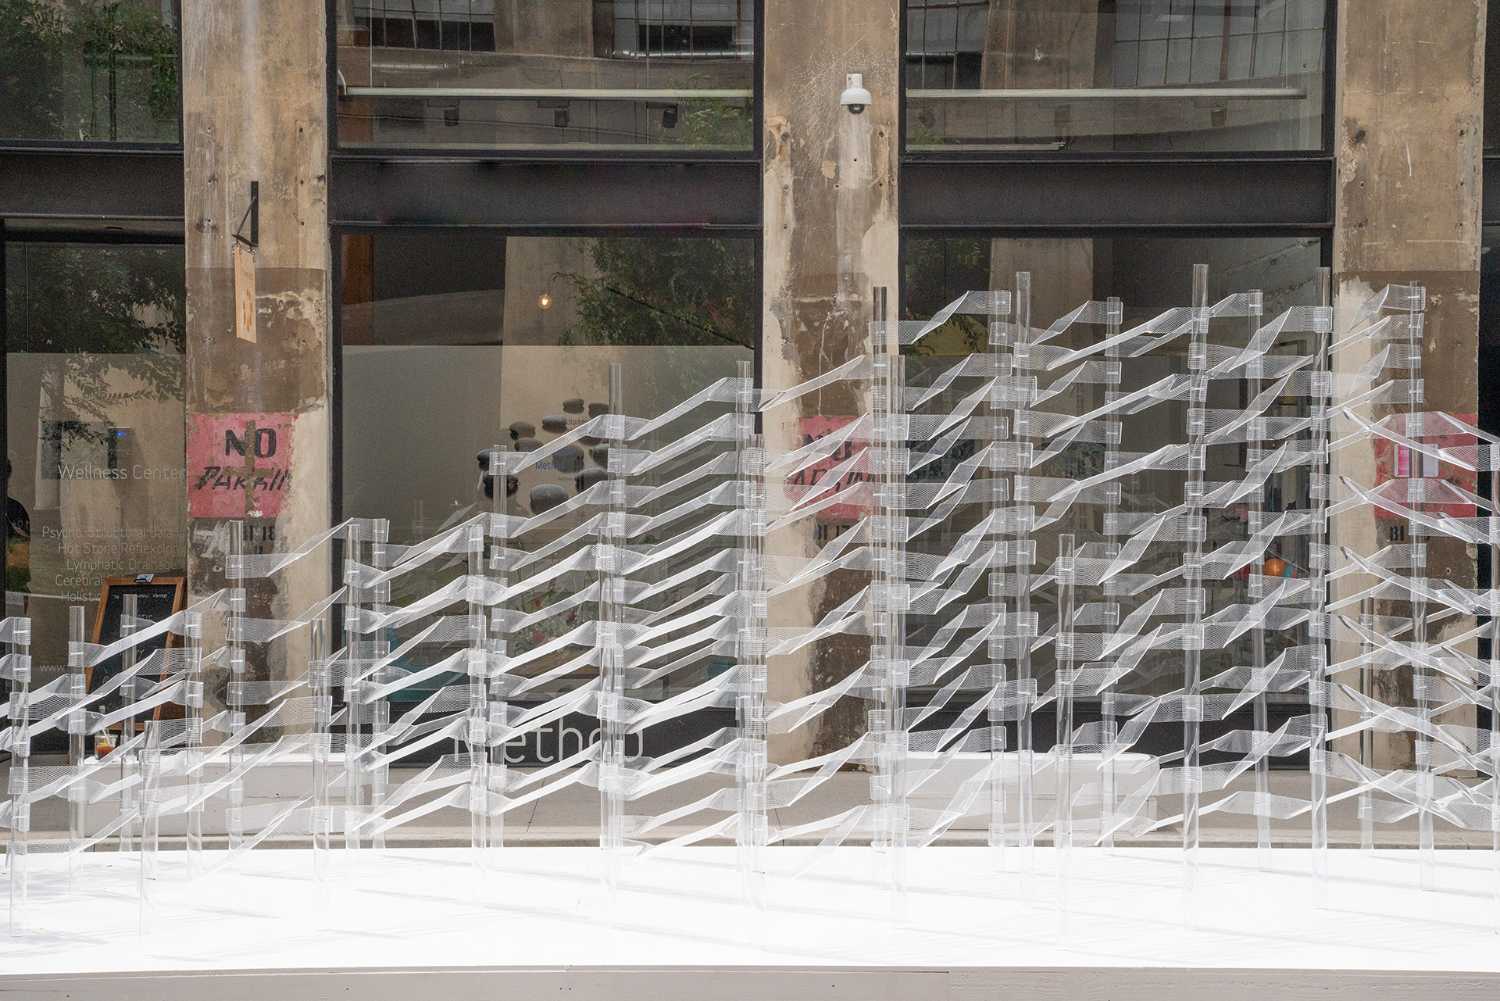 Kori. An installation which invites passersby to play with its transparent features